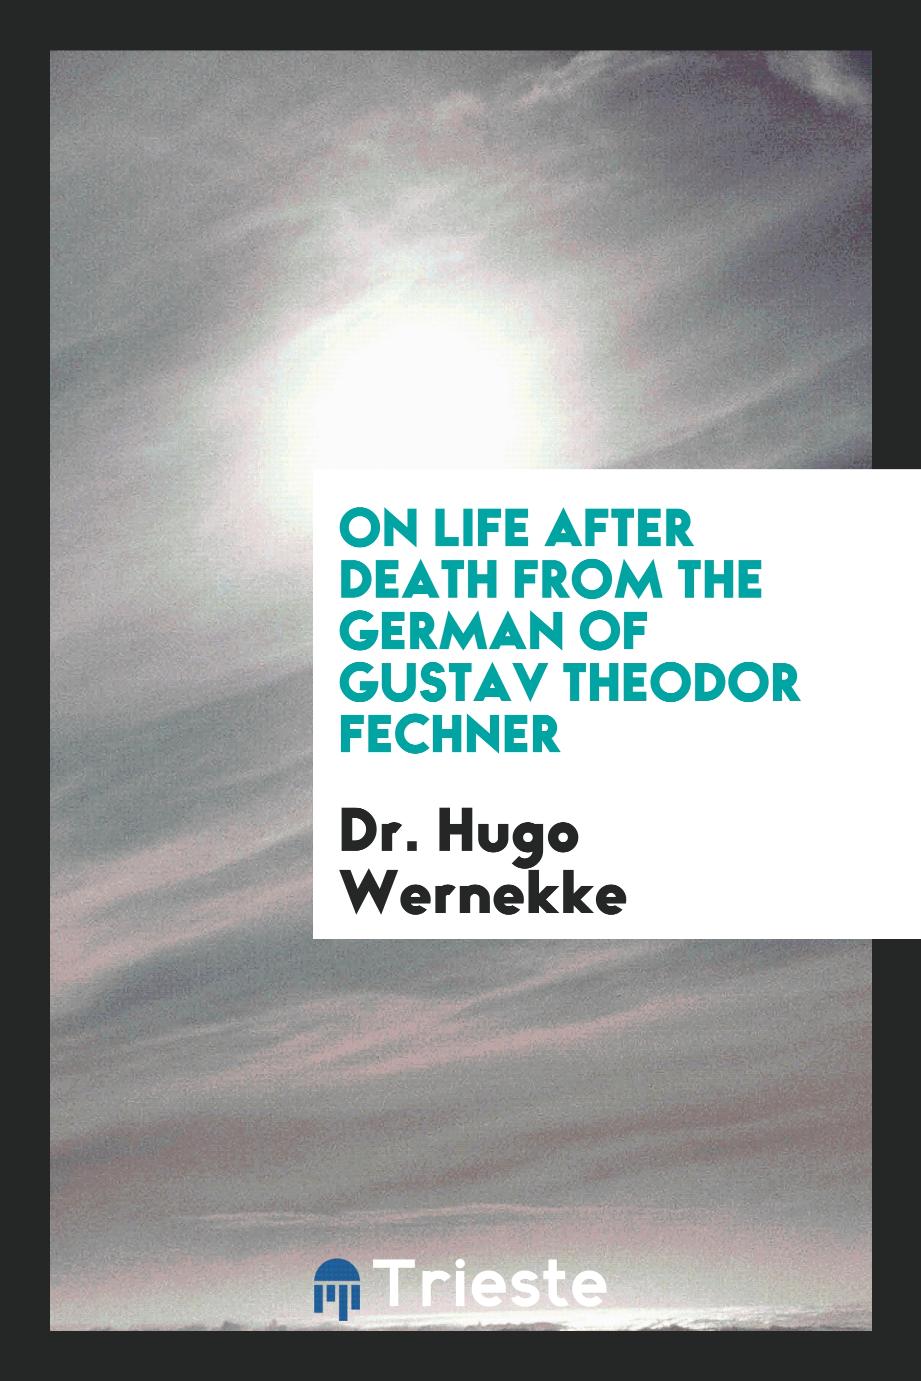 On Life After Death from the German of Gustav Theodor Fechner